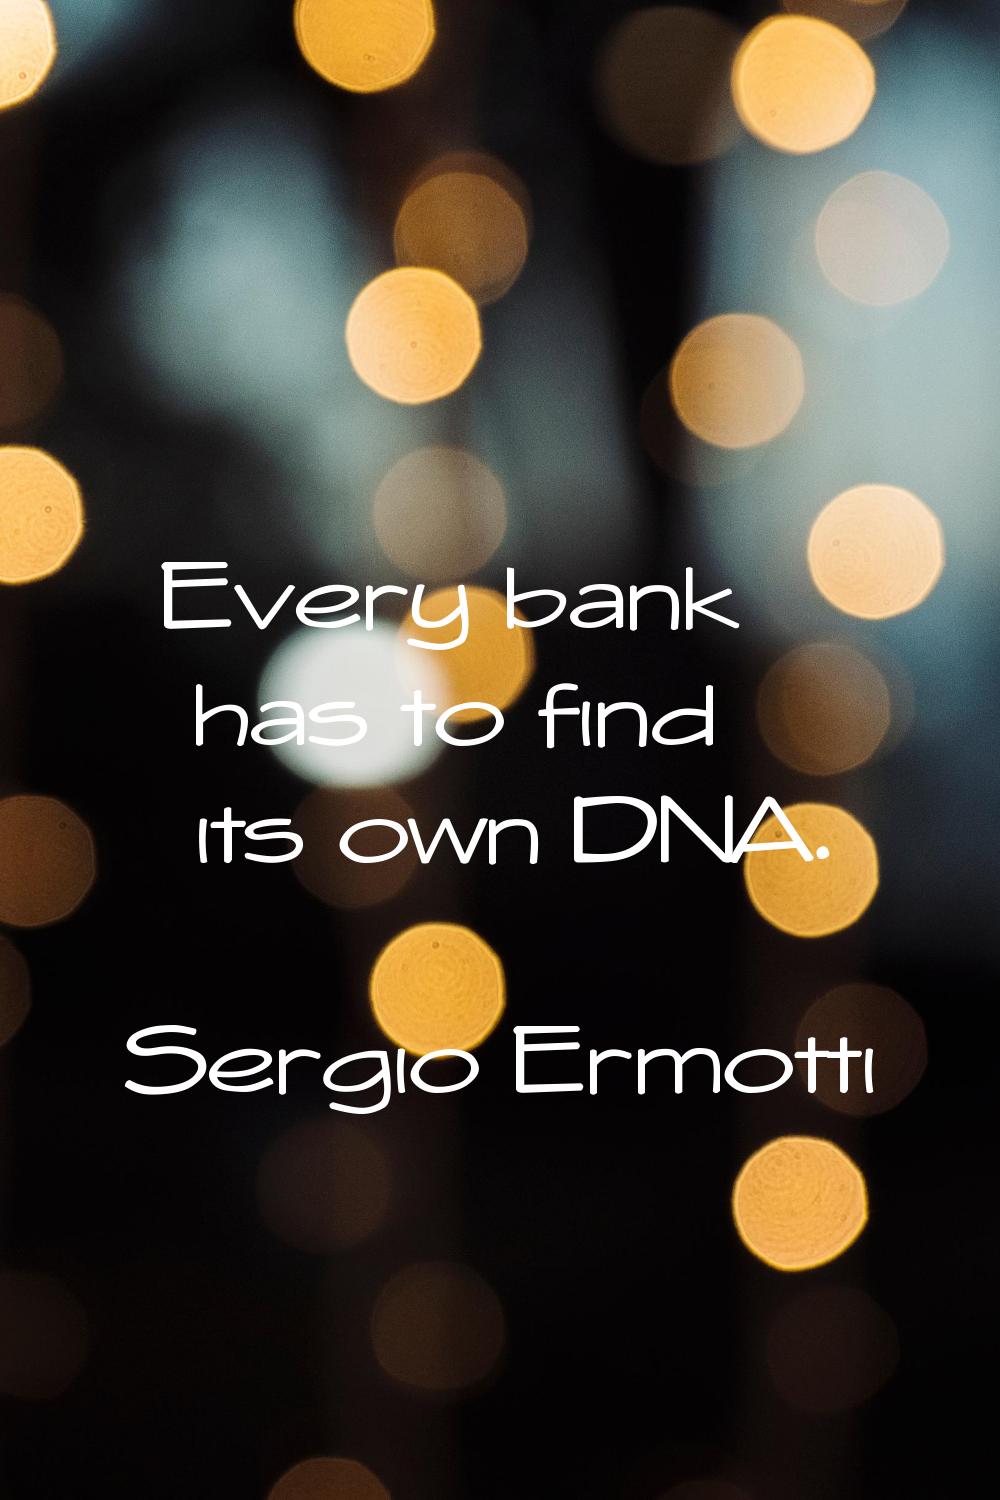 Every bank has to find its own DNA.